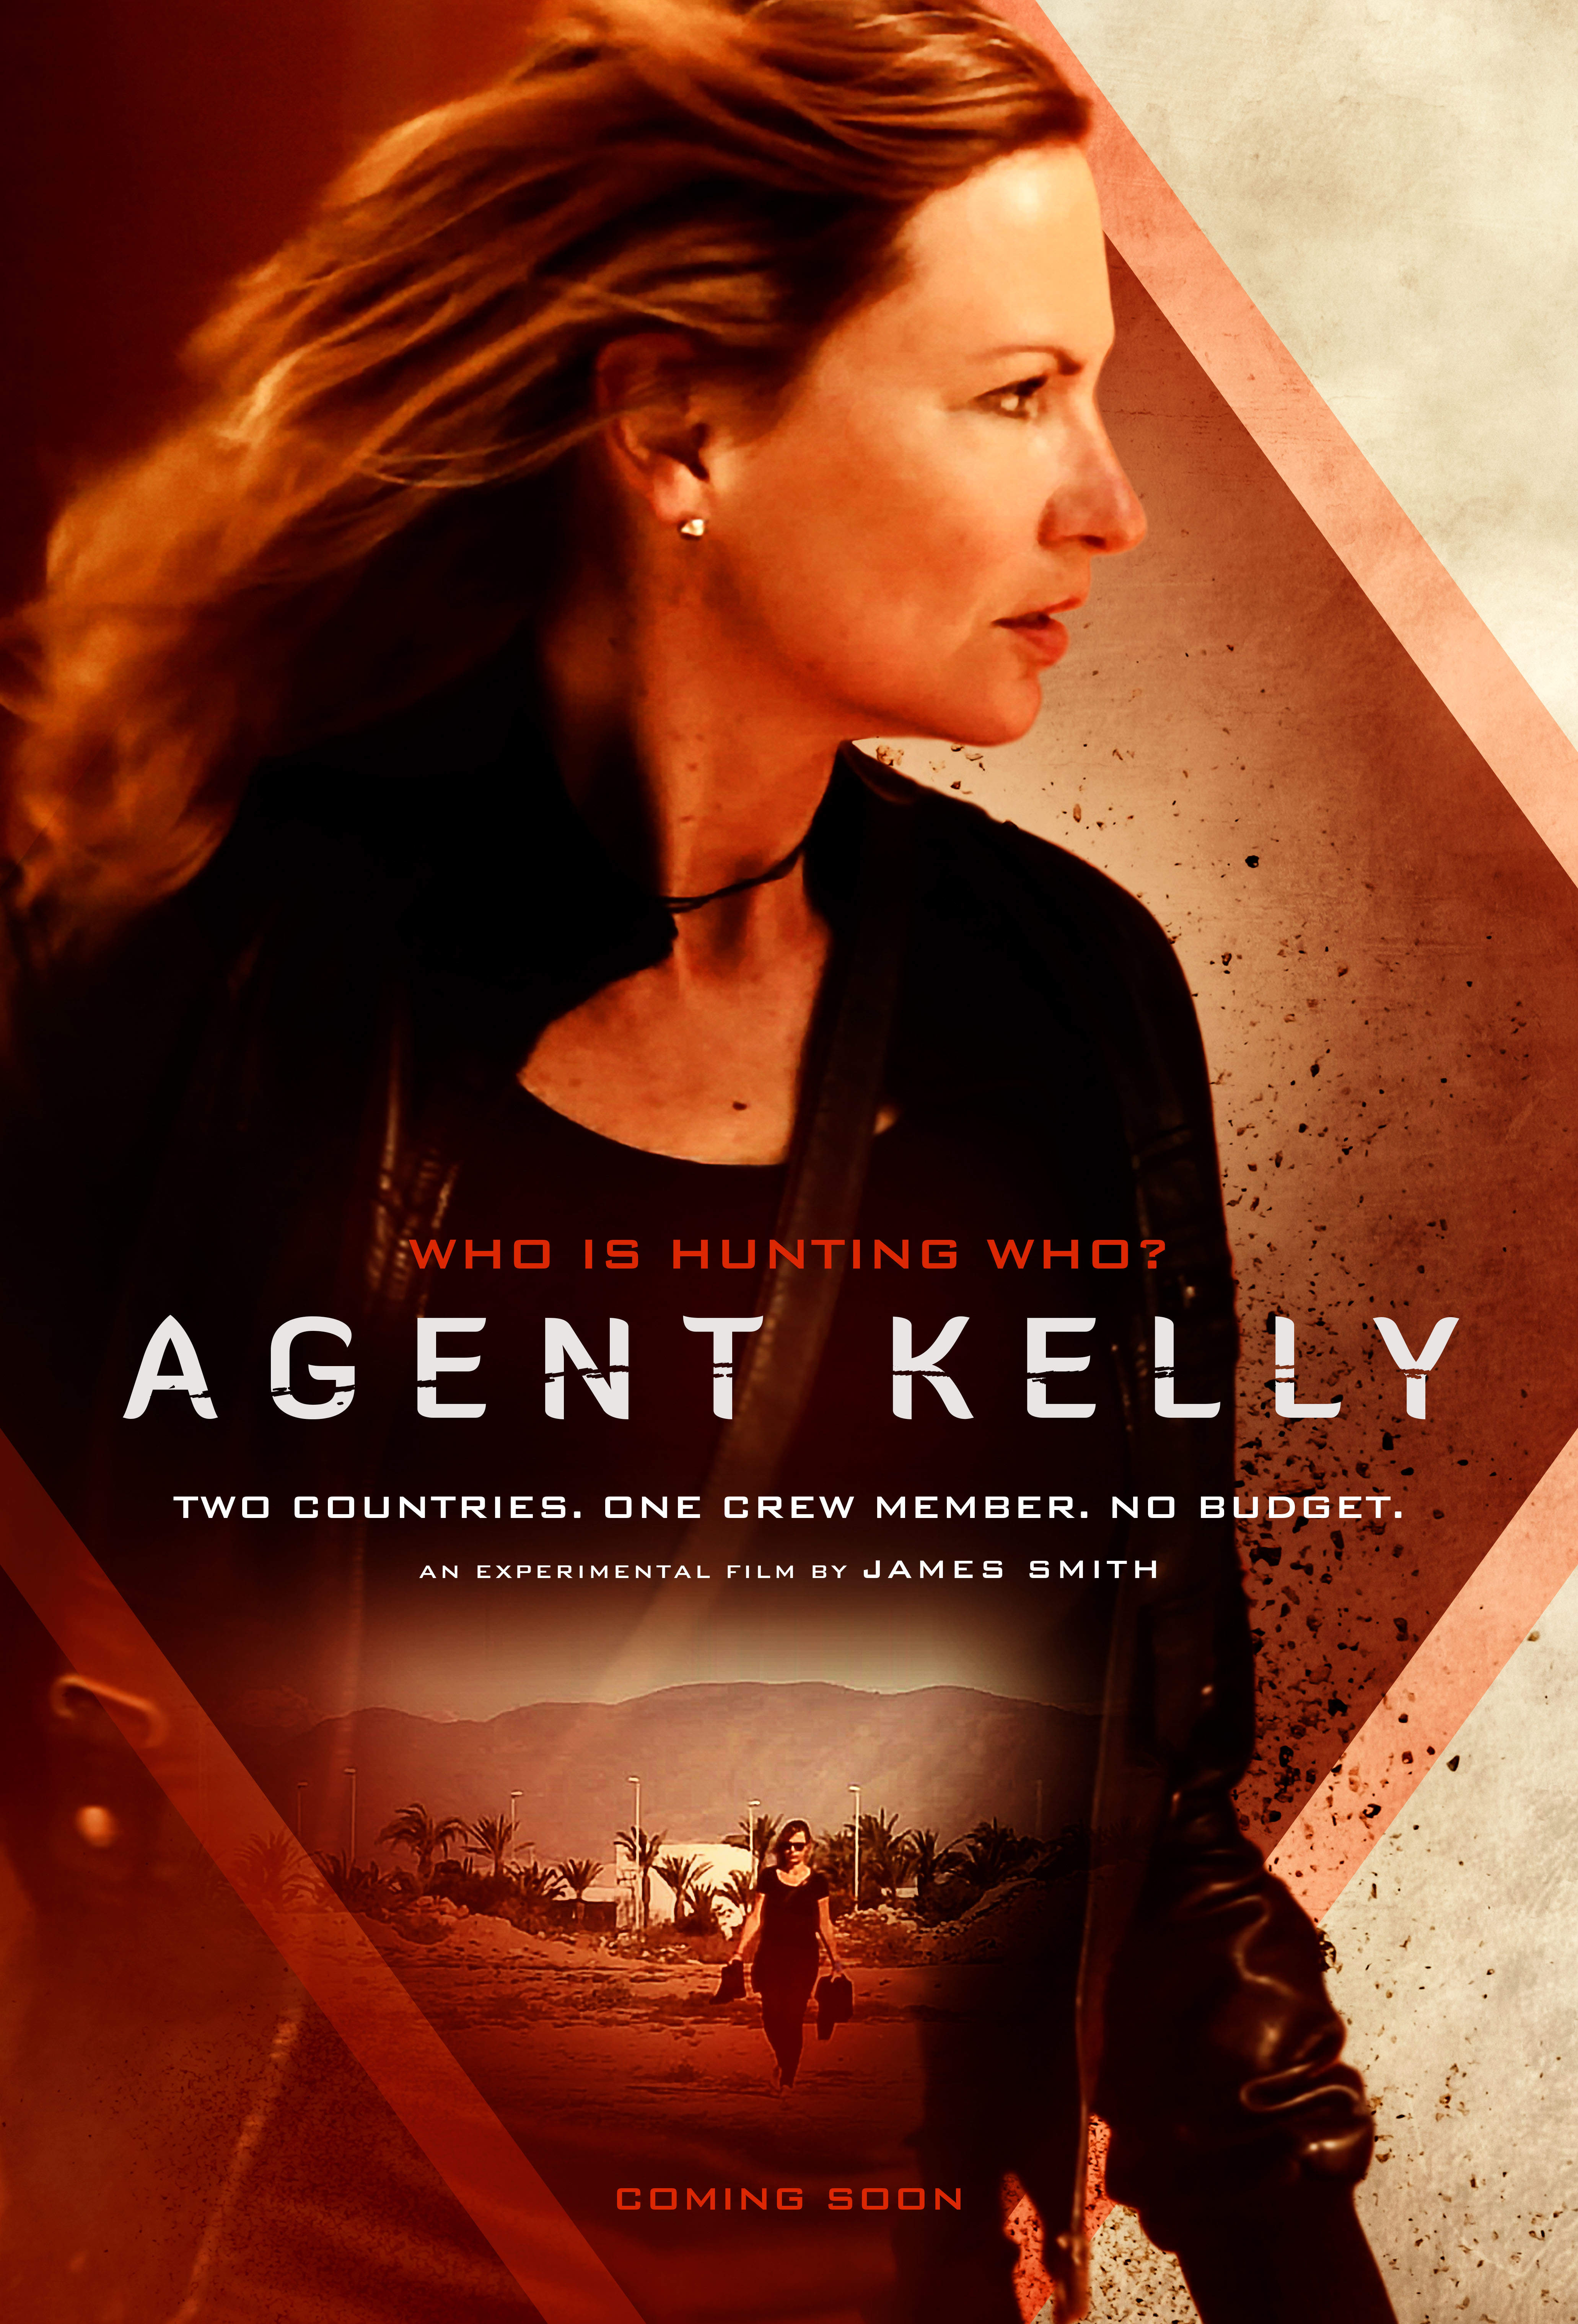 Tickets go on sale for Agent Kelly World Premiere